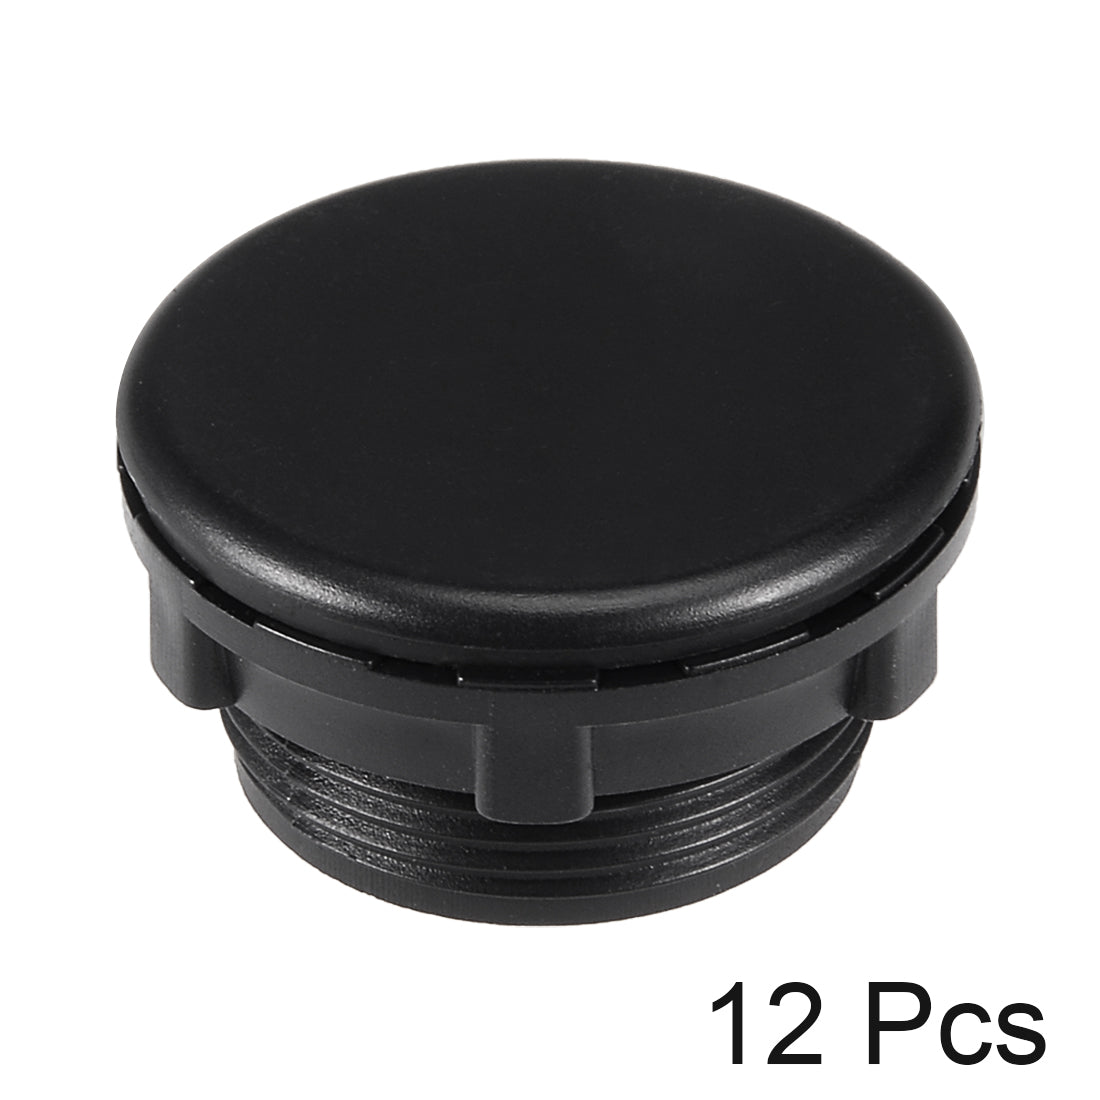 uxcell Uxcell 12 Pcs 30mm Black Plastic Push Button Switch Hole Panel Plug